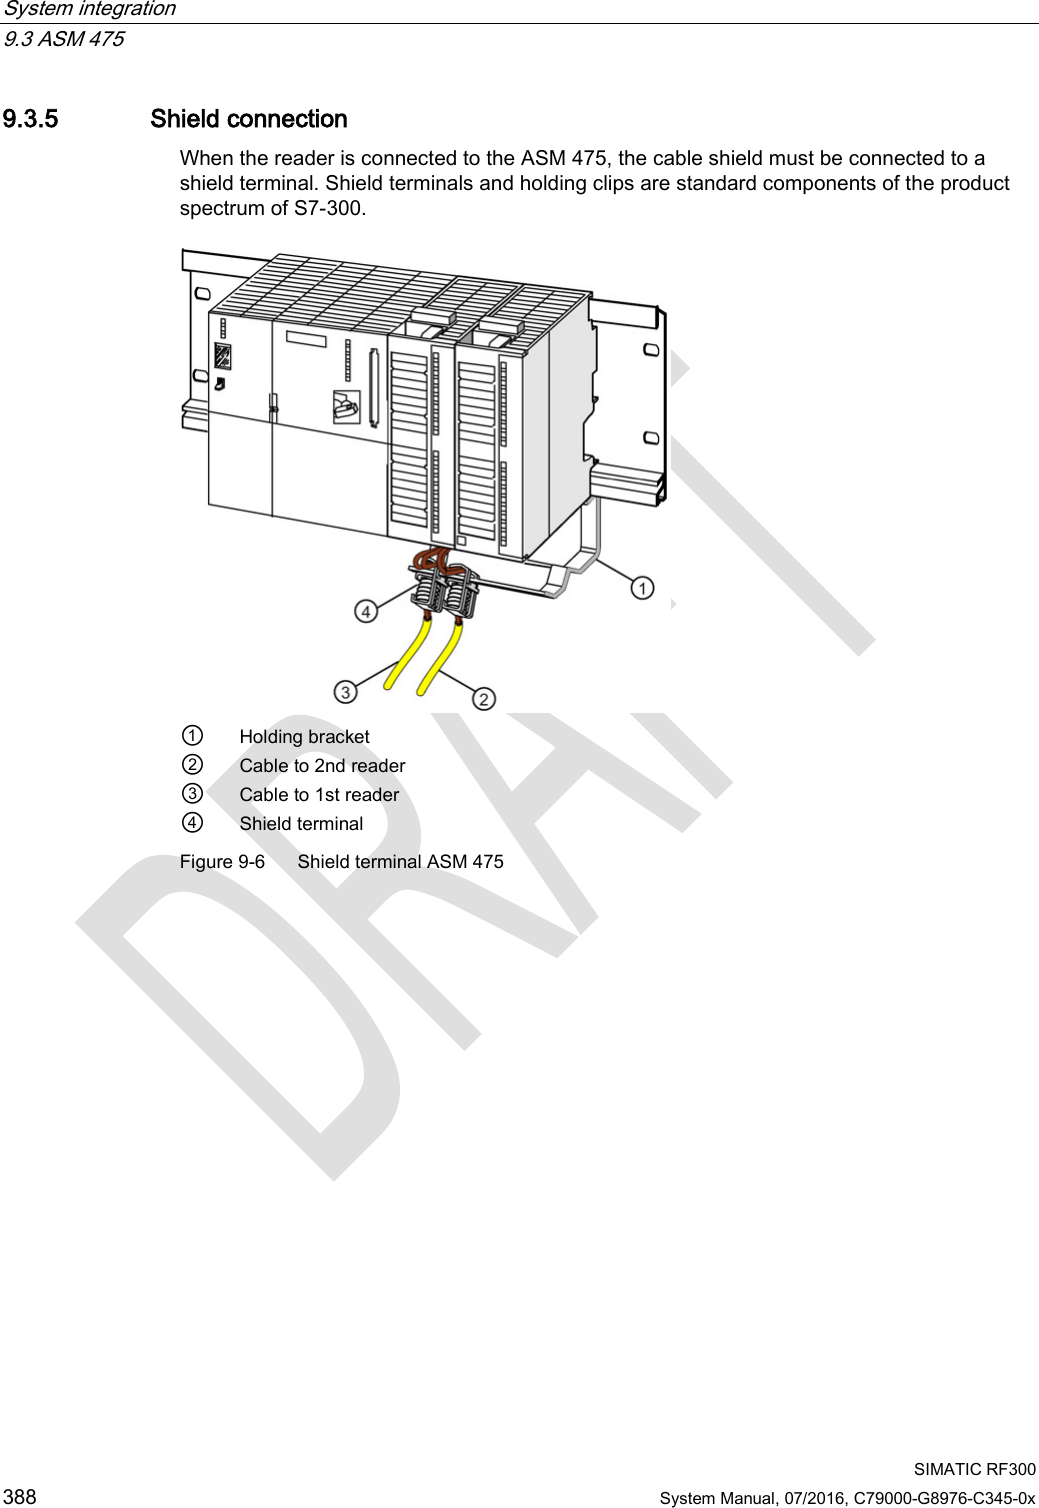 System integration   9.3 ASM 475  SIMATIC RF300 388 System Manual, 07/2016, C79000-G8976-C345-0x 9.3.5 Shield connection When the reader is connected to the ASM 475, the cable shield must be connected to a shield terminal. Shield terminals and holding clips are standard components of the product spectrum of S7-300.  ① Holding bracket ② Cable to 2nd reader ③ Cable to 1st reader ④ Shield terminal Figure 9-6  Shield terminal ASM 475 